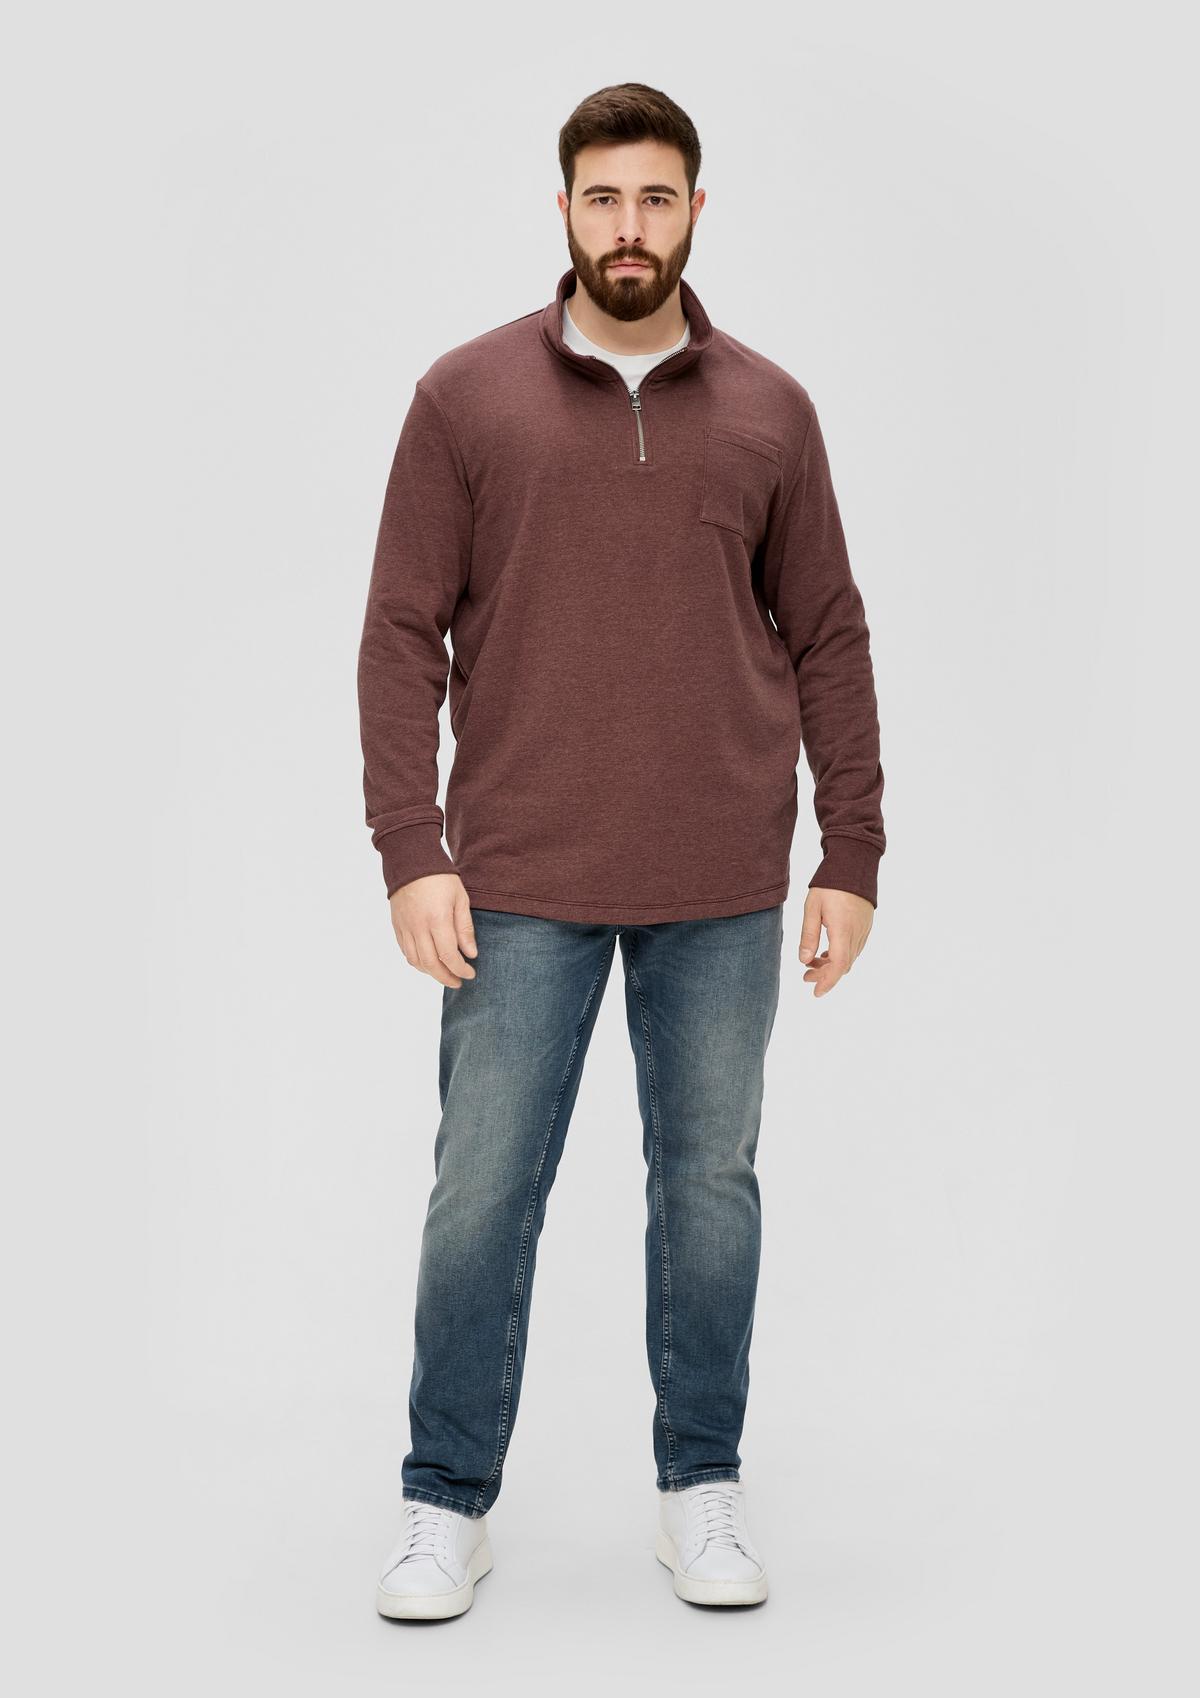 s.Oliver Sweatshirt with a breast pocket